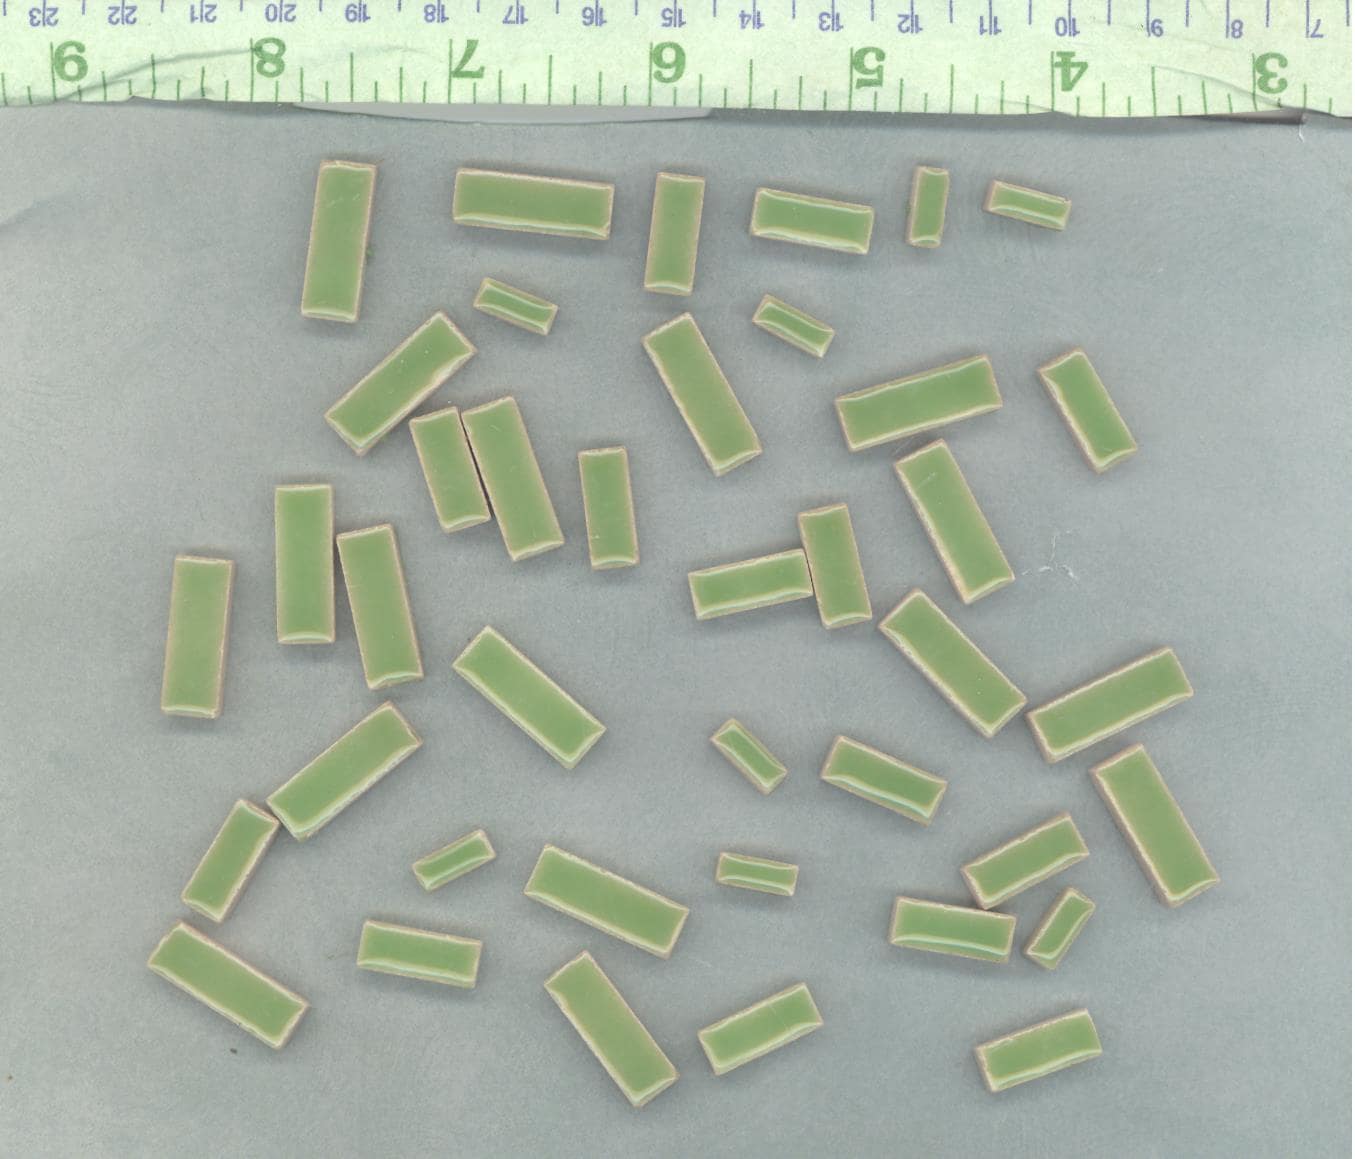 Jade Green Mini Rectangles Mosaic Tiles - 50g Ceramic in Mix of 3 Sizes 1/2" and 3/4"